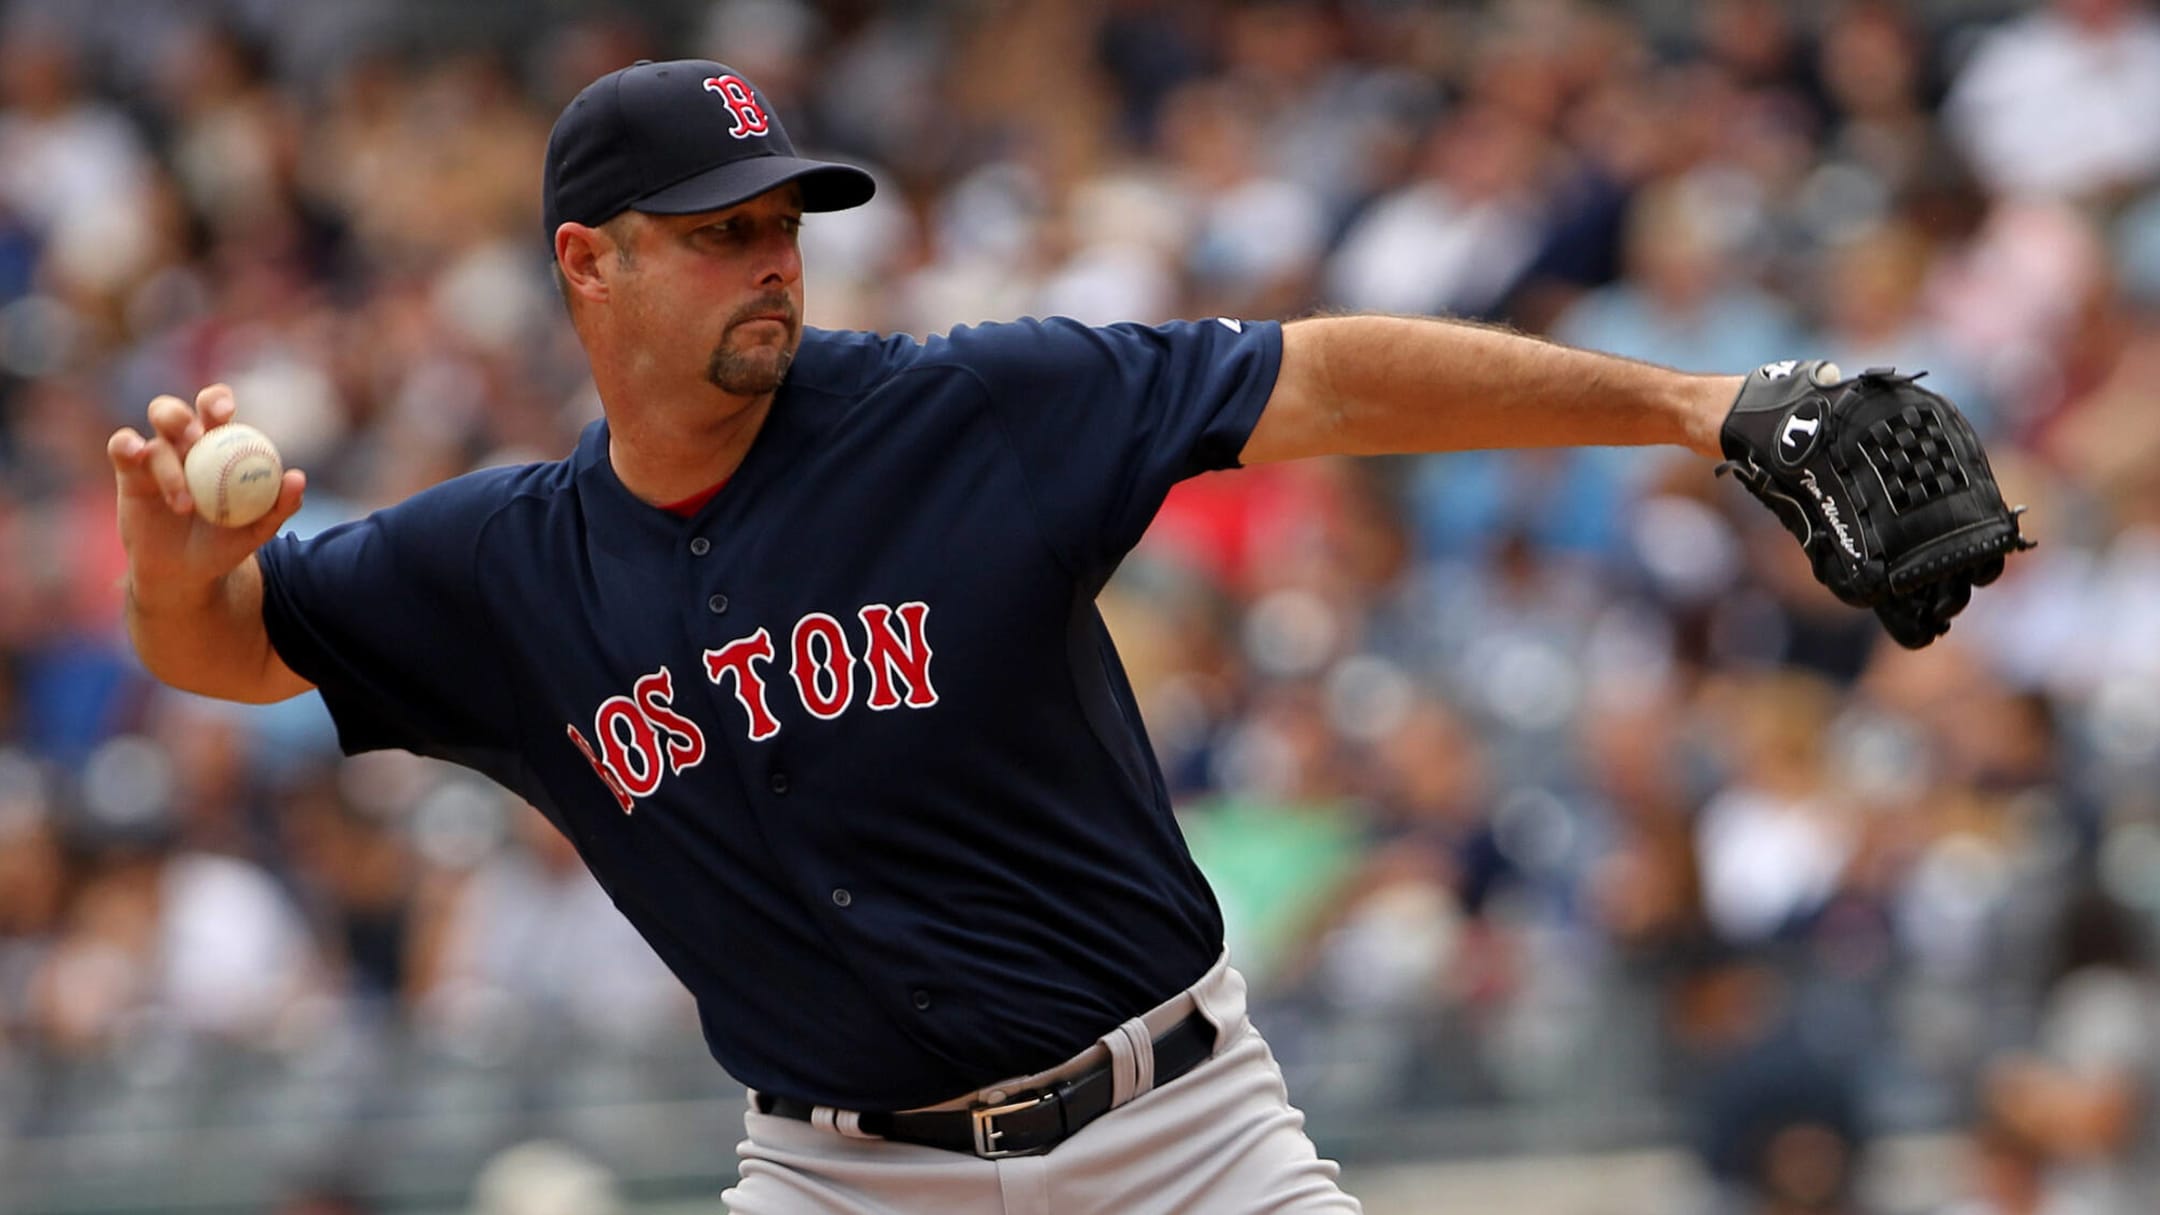 Always more than a baseball player, Tim Wakefield was a hero, on